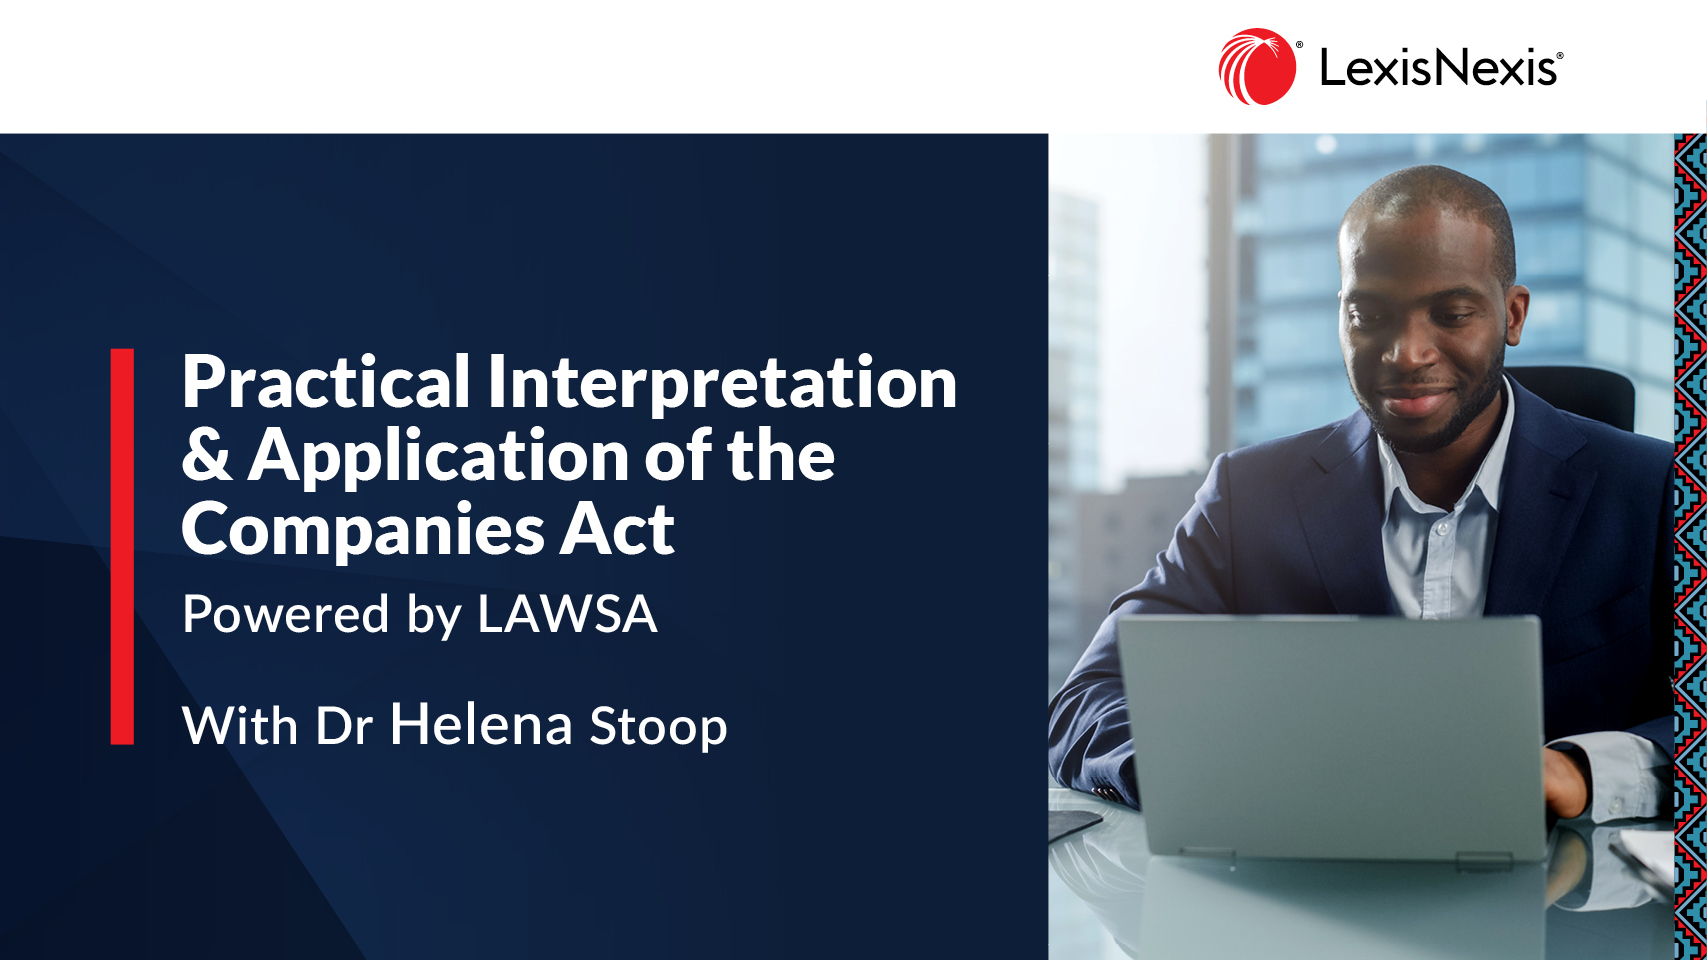 Practical Interpretation & Application of the Companies Act - Powered by Lawsa 